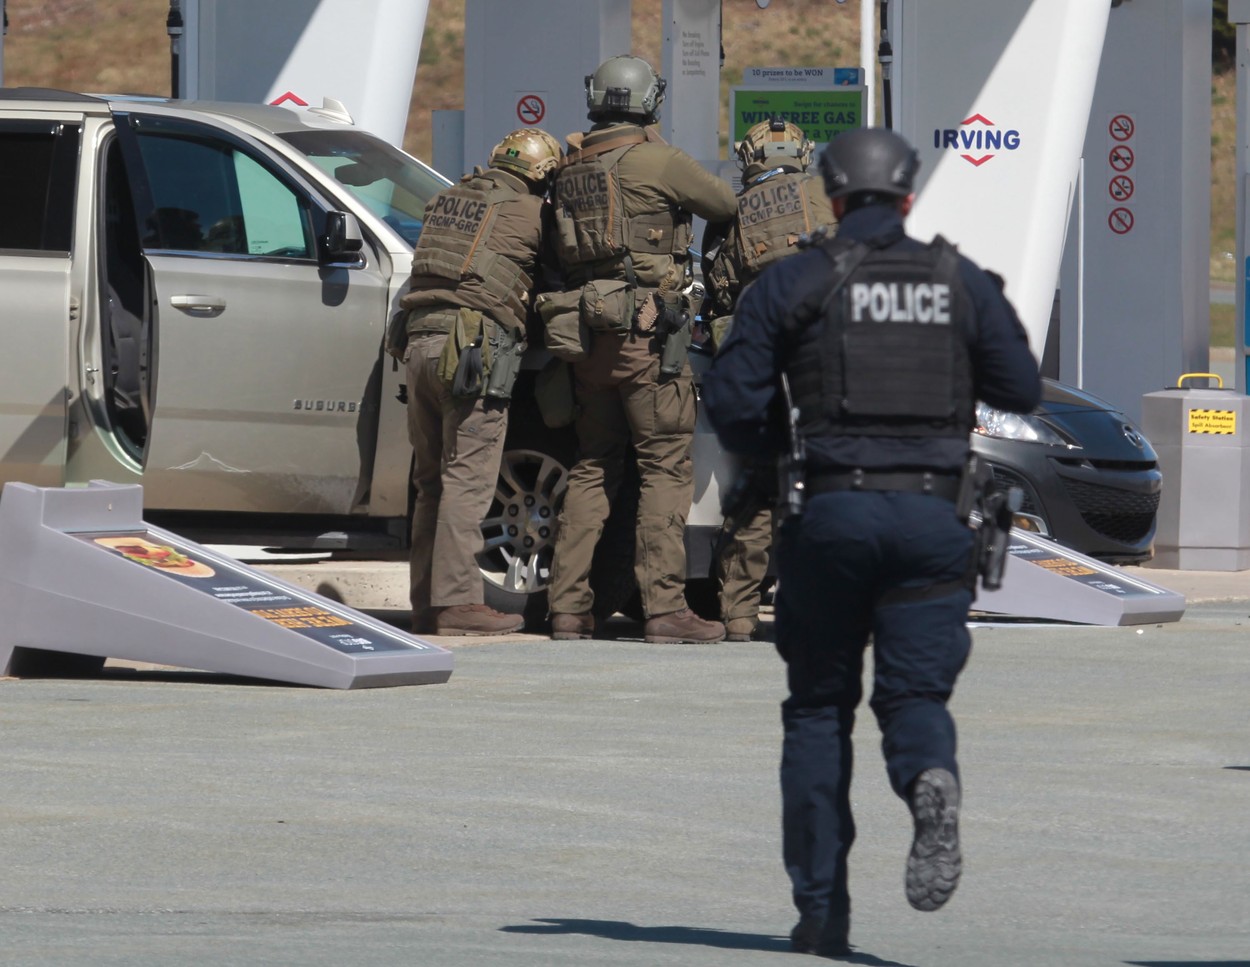 RCMP officers prepare to take a person into custody at a gas station in Enfield, N.S. on Sunday April 19, 2020. A suspect in an active shooter investigation is in custody in Nova Scotia, with police saying several people were harmed before a man wearing police clothing was arrested. Gabriel Wortman was arrested by the RCMP at the Irving Big Stop in Enfield, N.S., about 35 km from downtown Halifax., Image: 514293516, License: Rights-managed, Restrictions: World rights excluding North America, Model Release: no, Credit line: Tim Krochak / PA Images / Profimedia